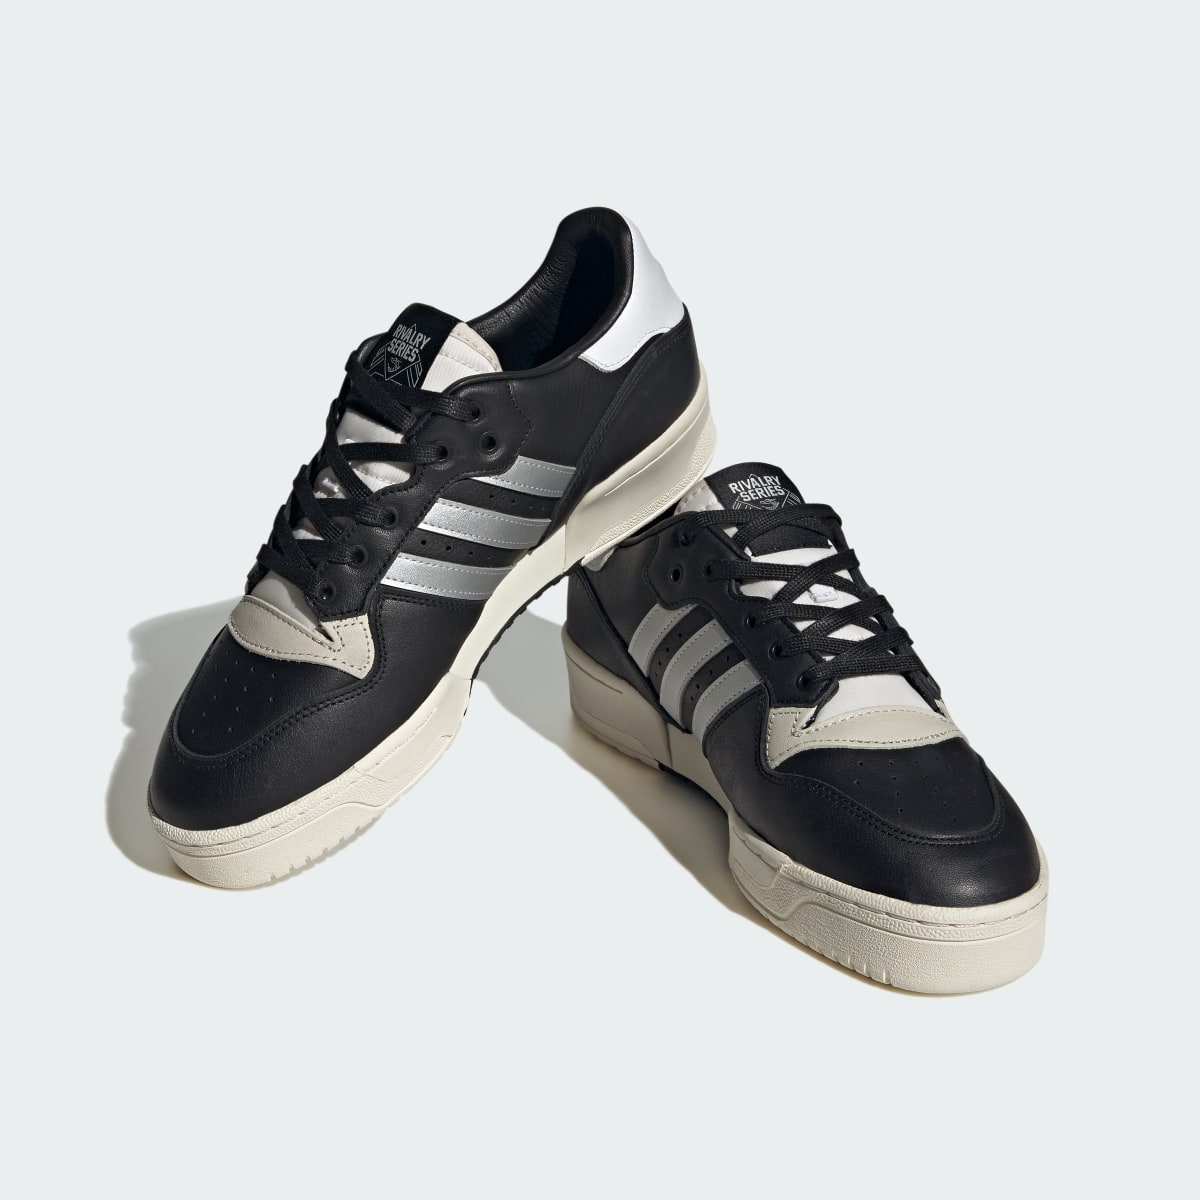 Adidas Rivalry Low Consortium Shoes. 5